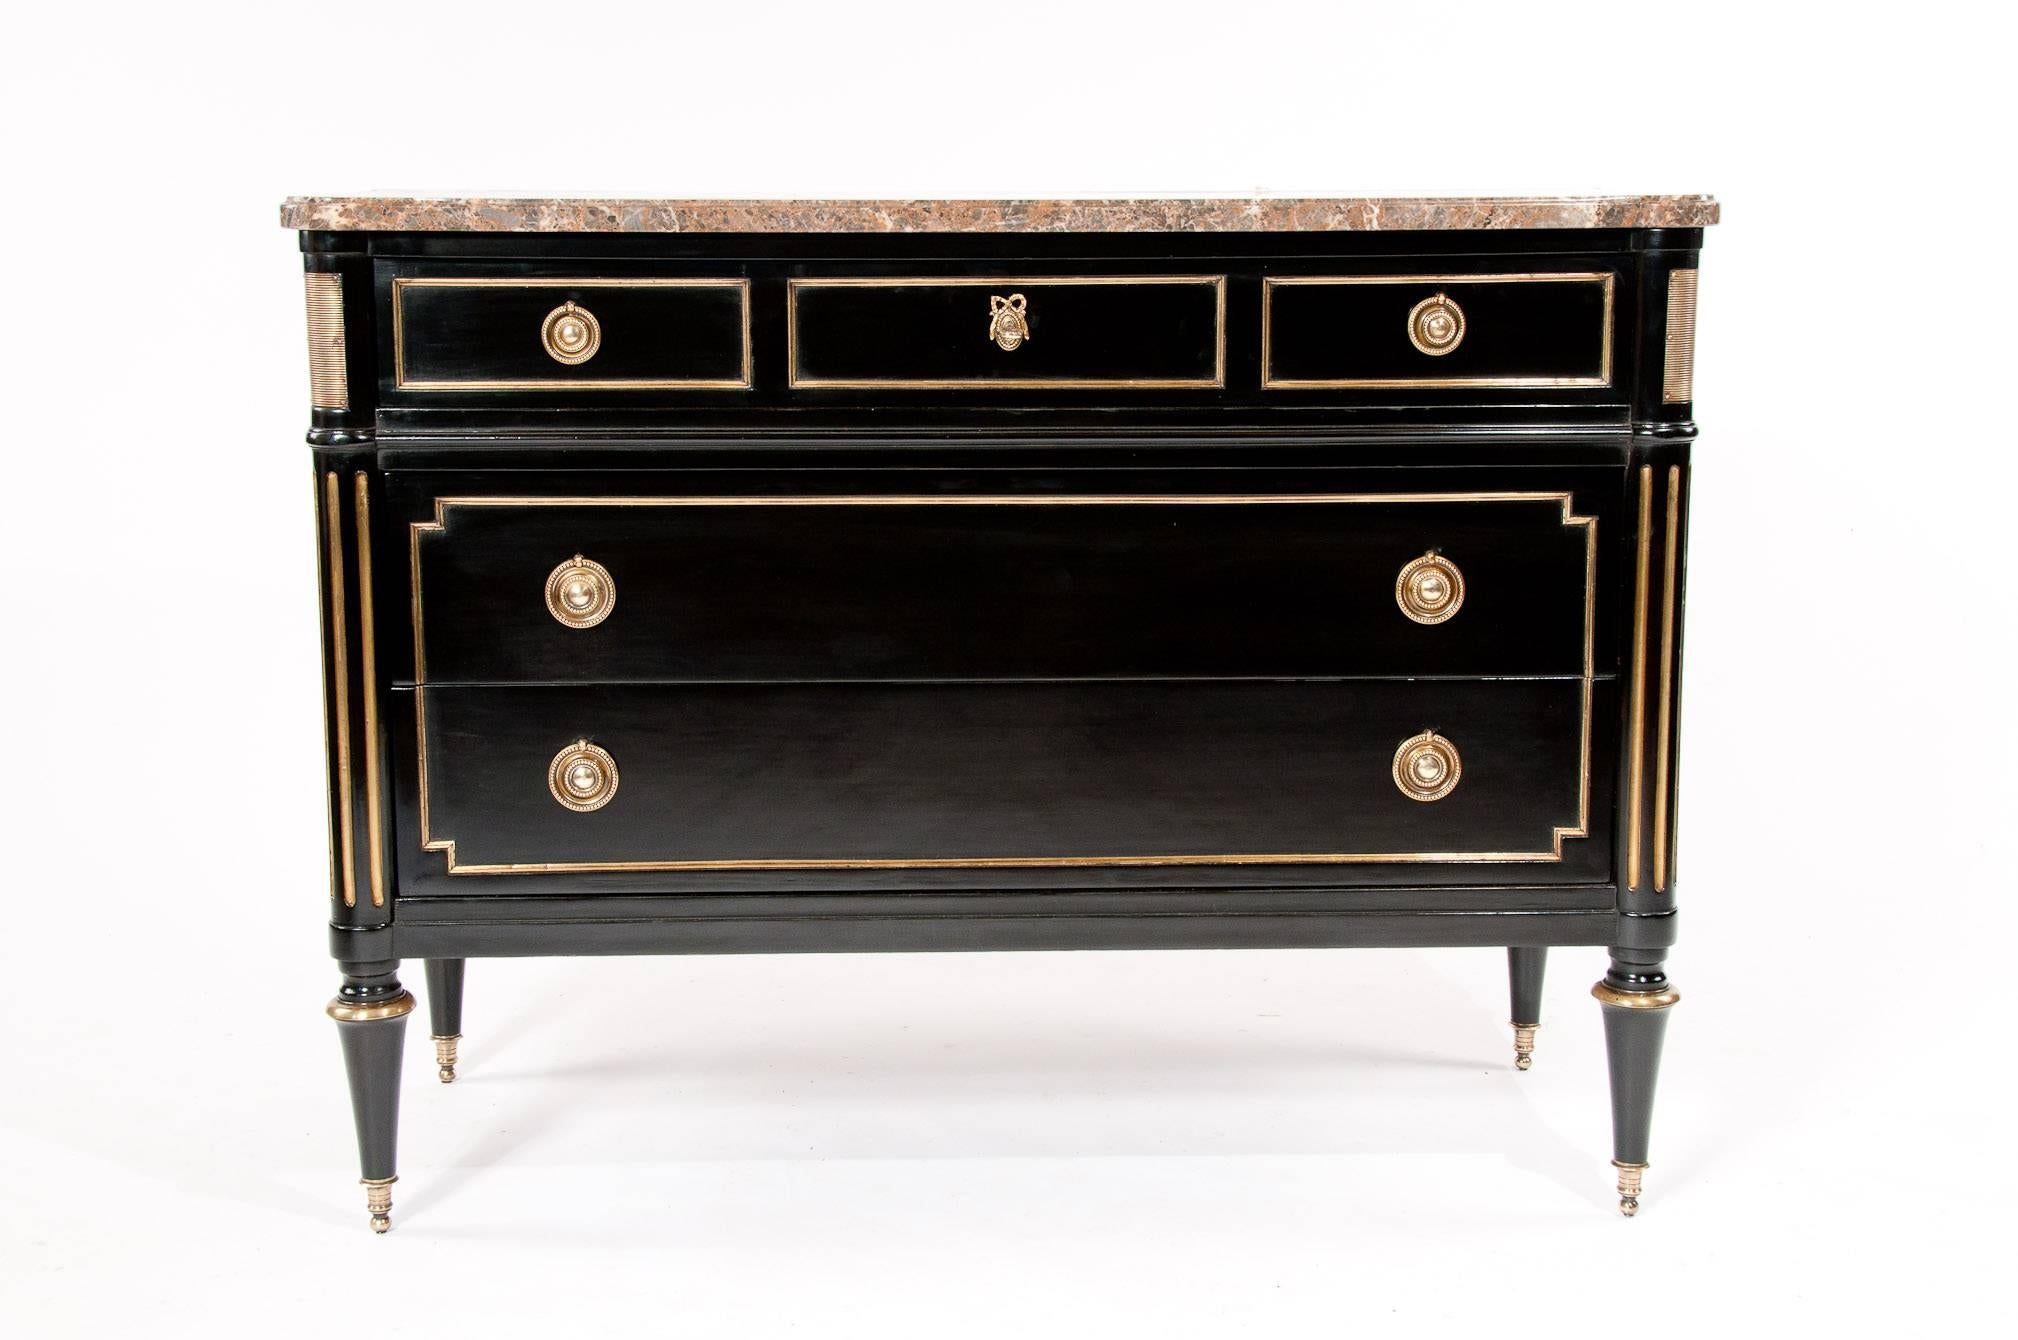 An extremely fine quality ebonised French marble topped and brass inlaid commode in the Directoire style and manner of Maison Jansen. 
Dating to circa 1930 this very fine quality commode has a shaped and moulded marble top over a brass panelled